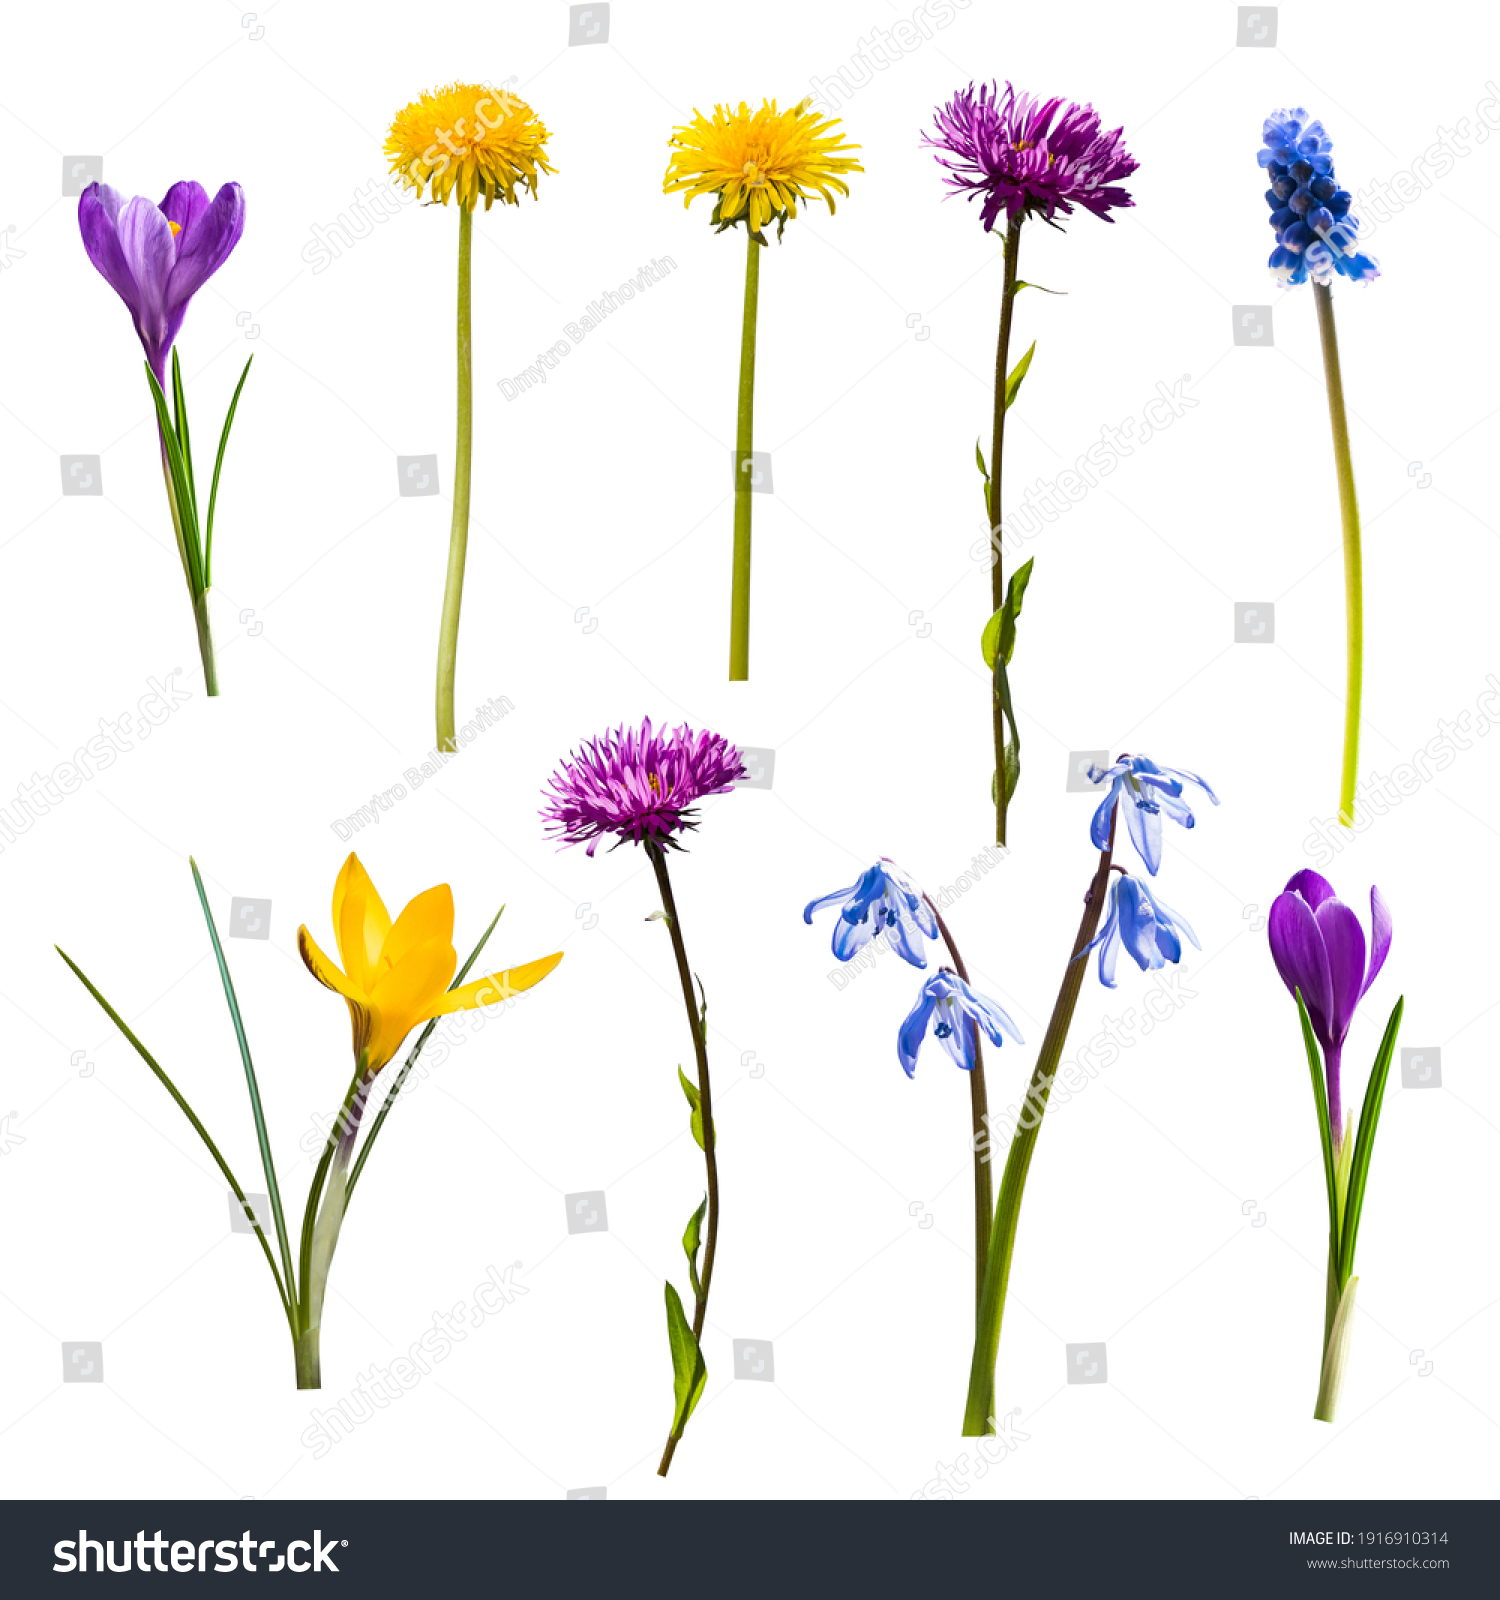 Set of different spring wild flowers isolated on white background #1916910314